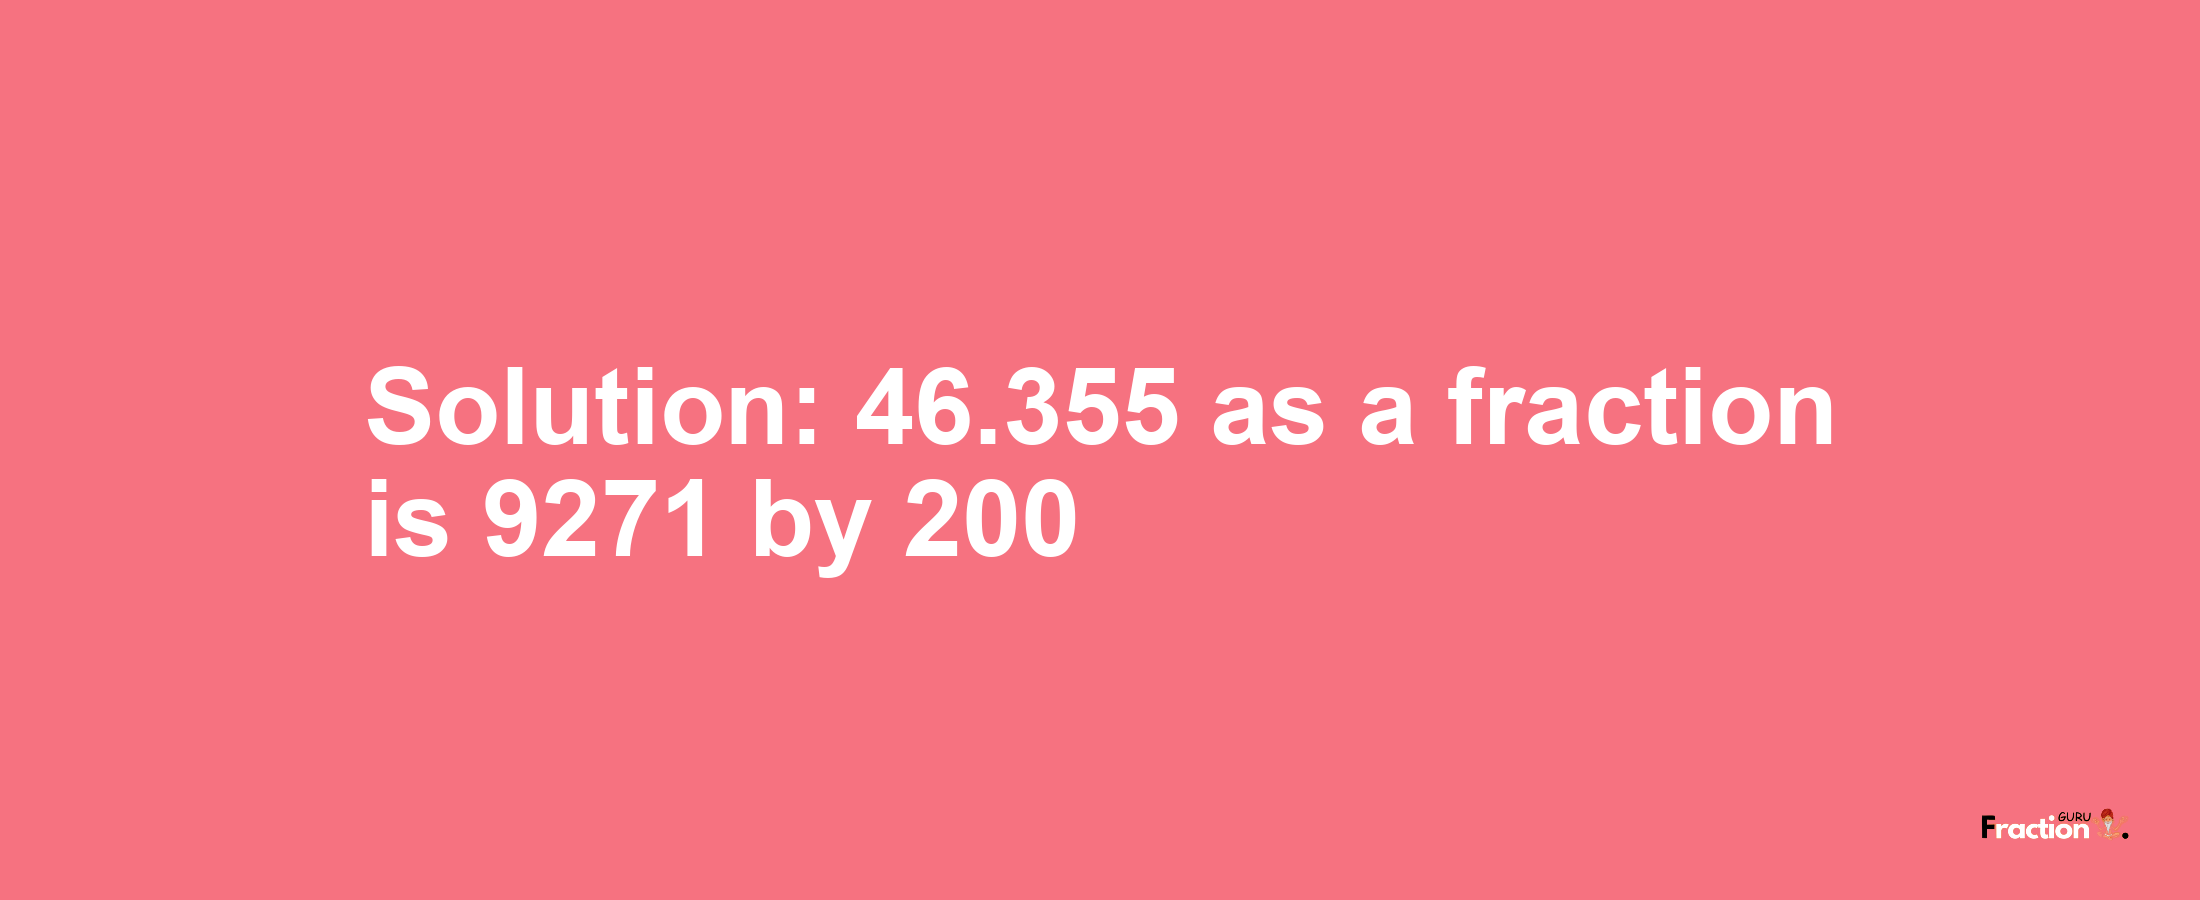 Solution:46.355 as a fraction is 9271/200